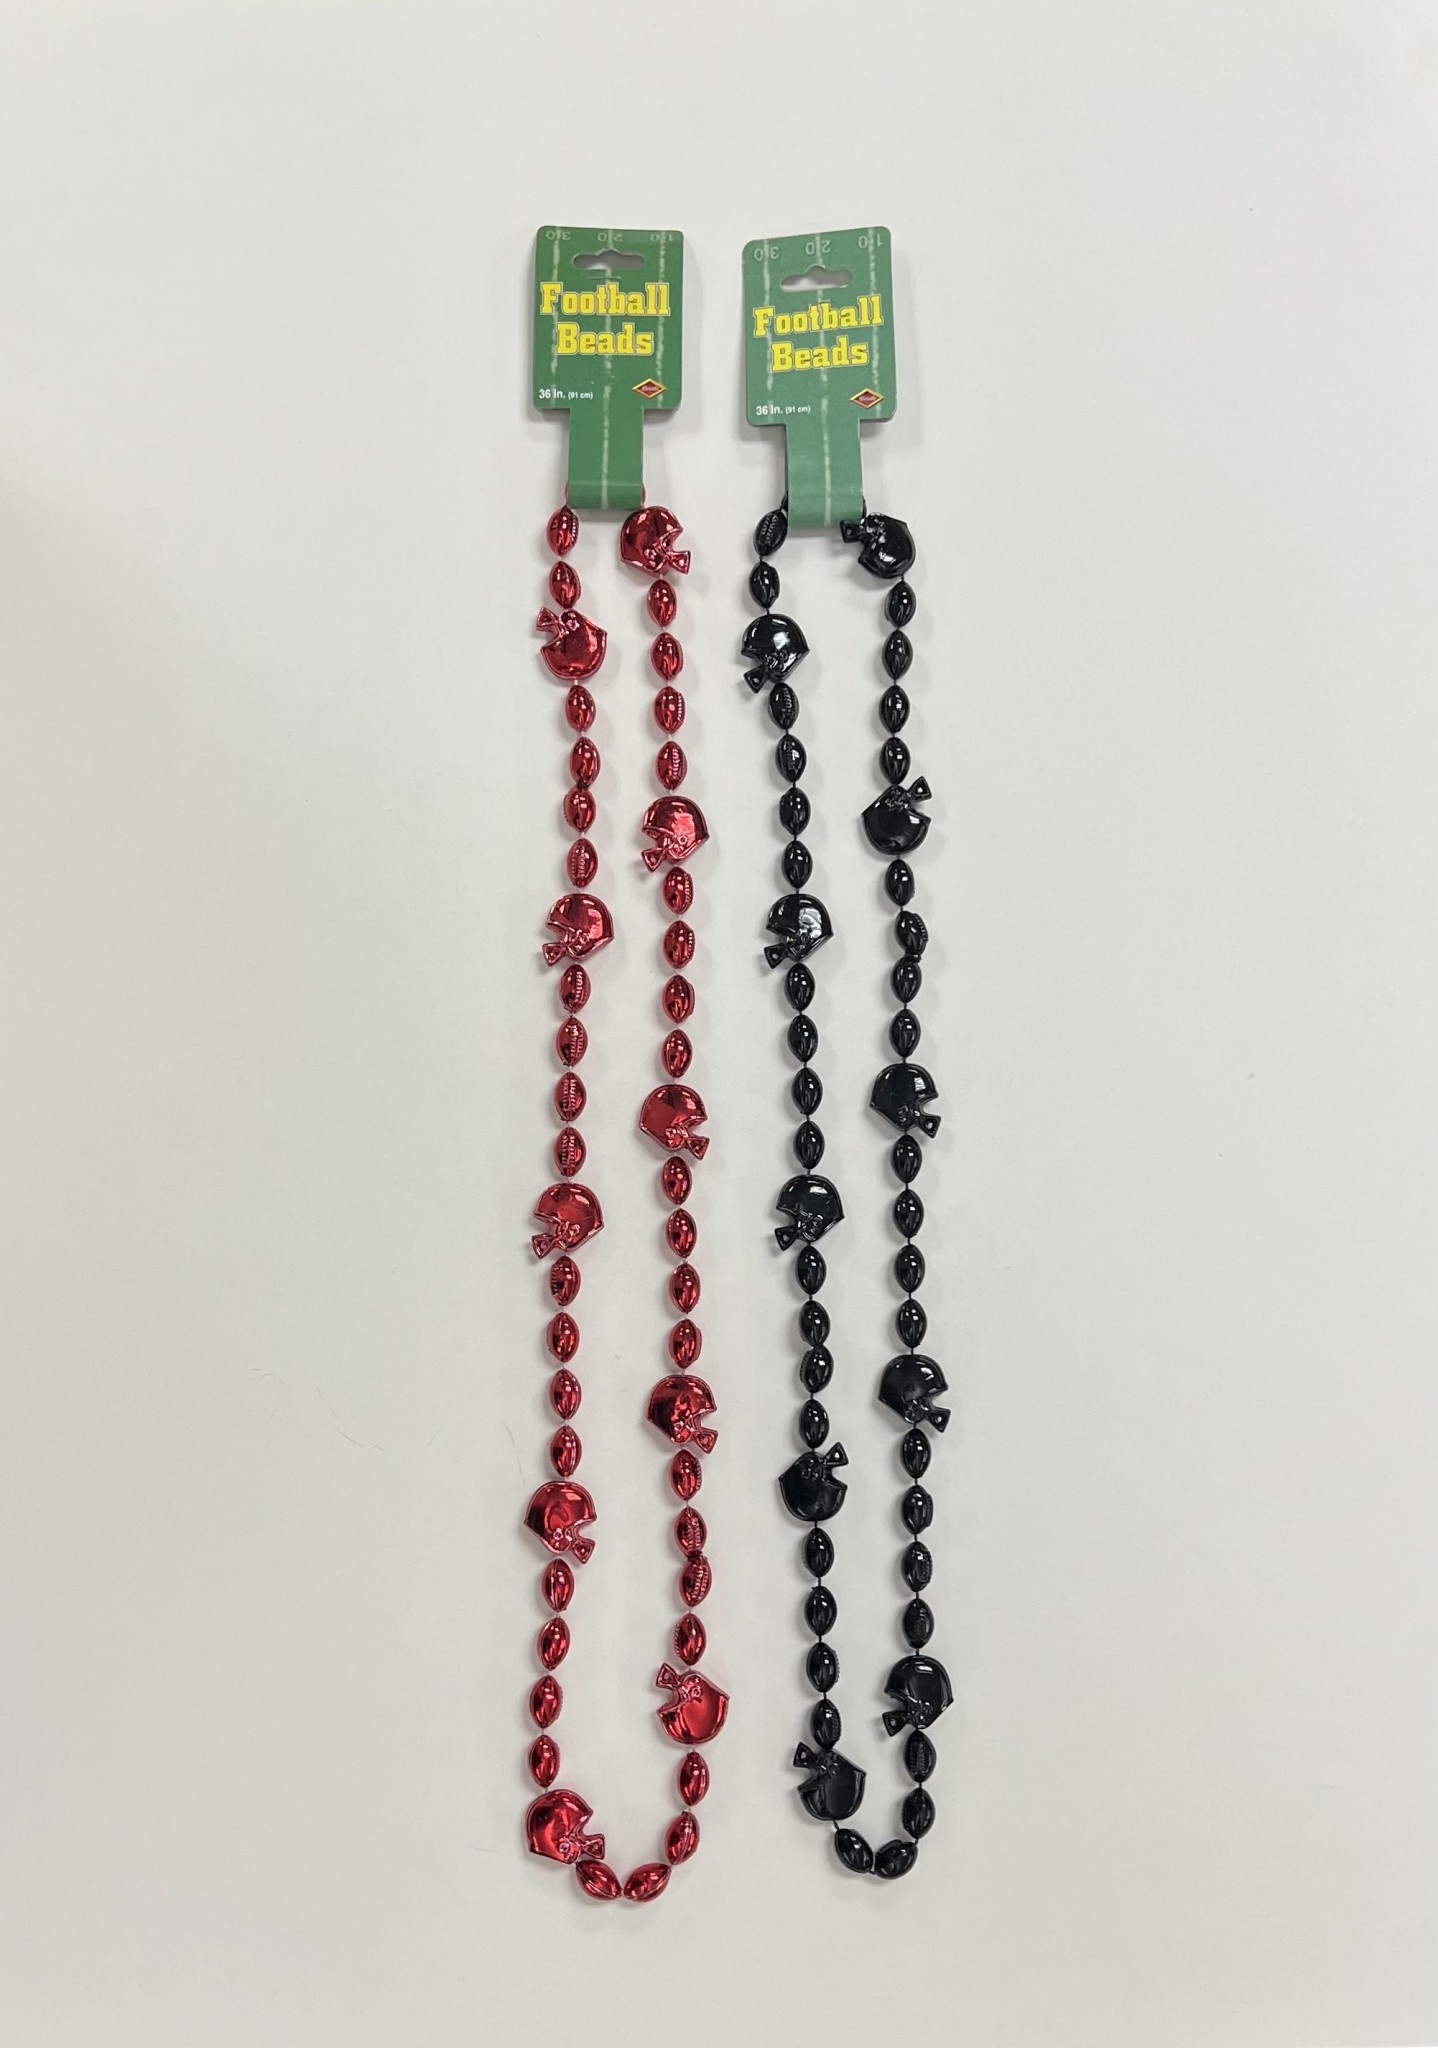 Football Beads - The King's Academy School Store